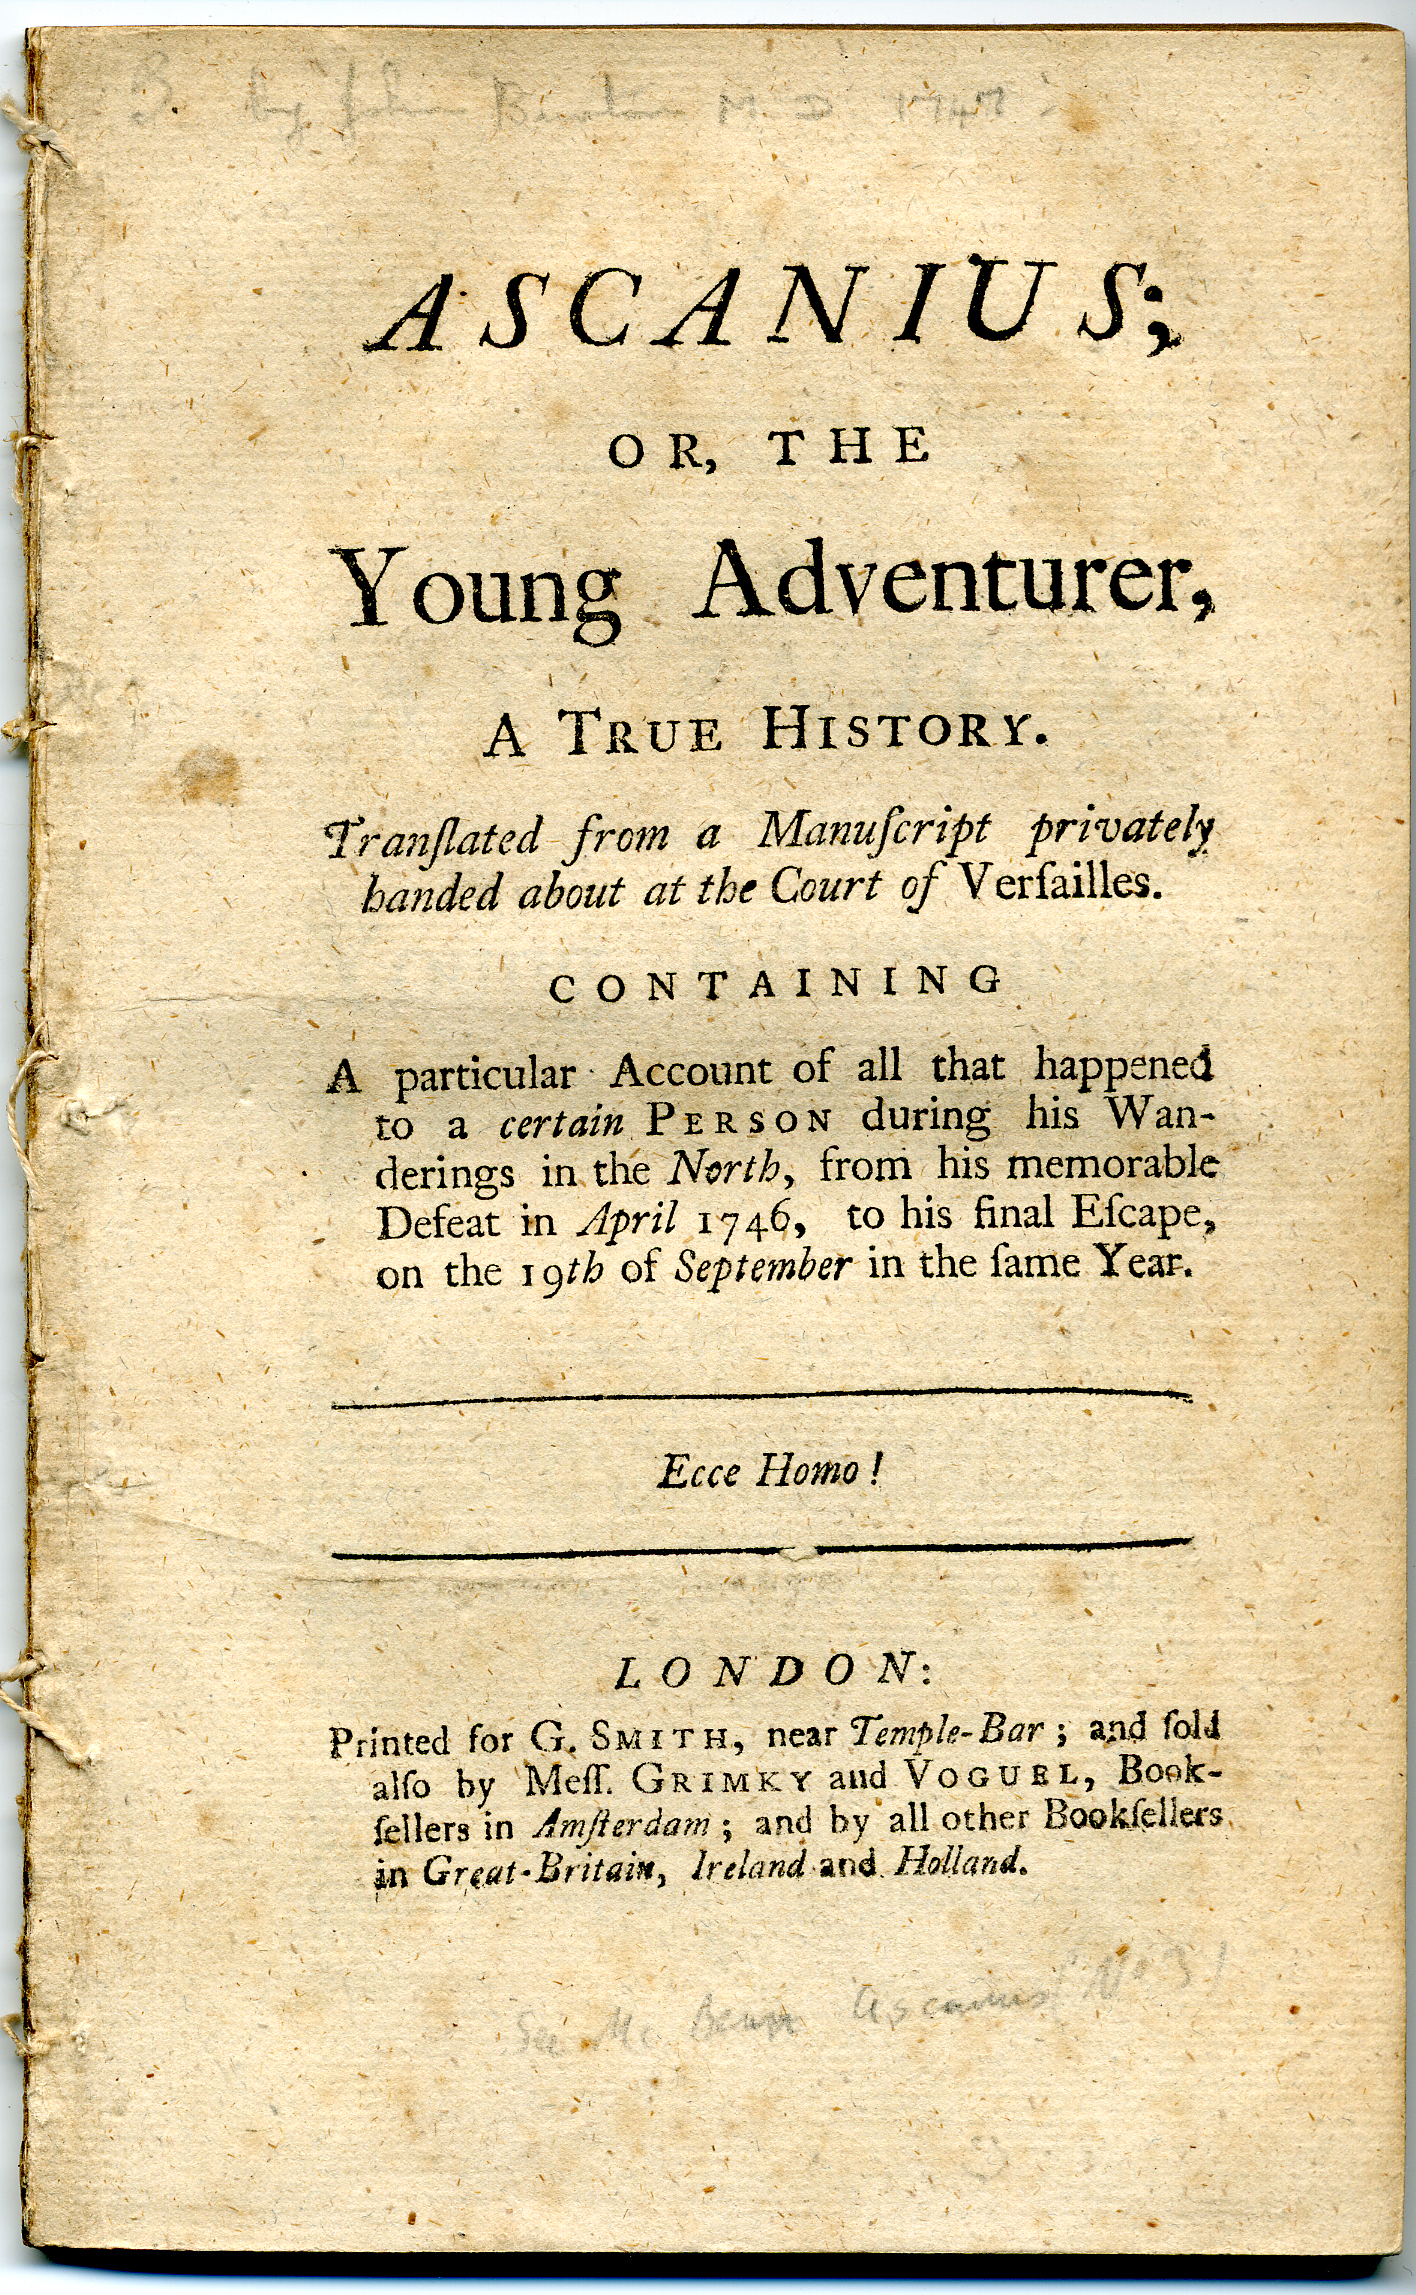 The First Version - 1746